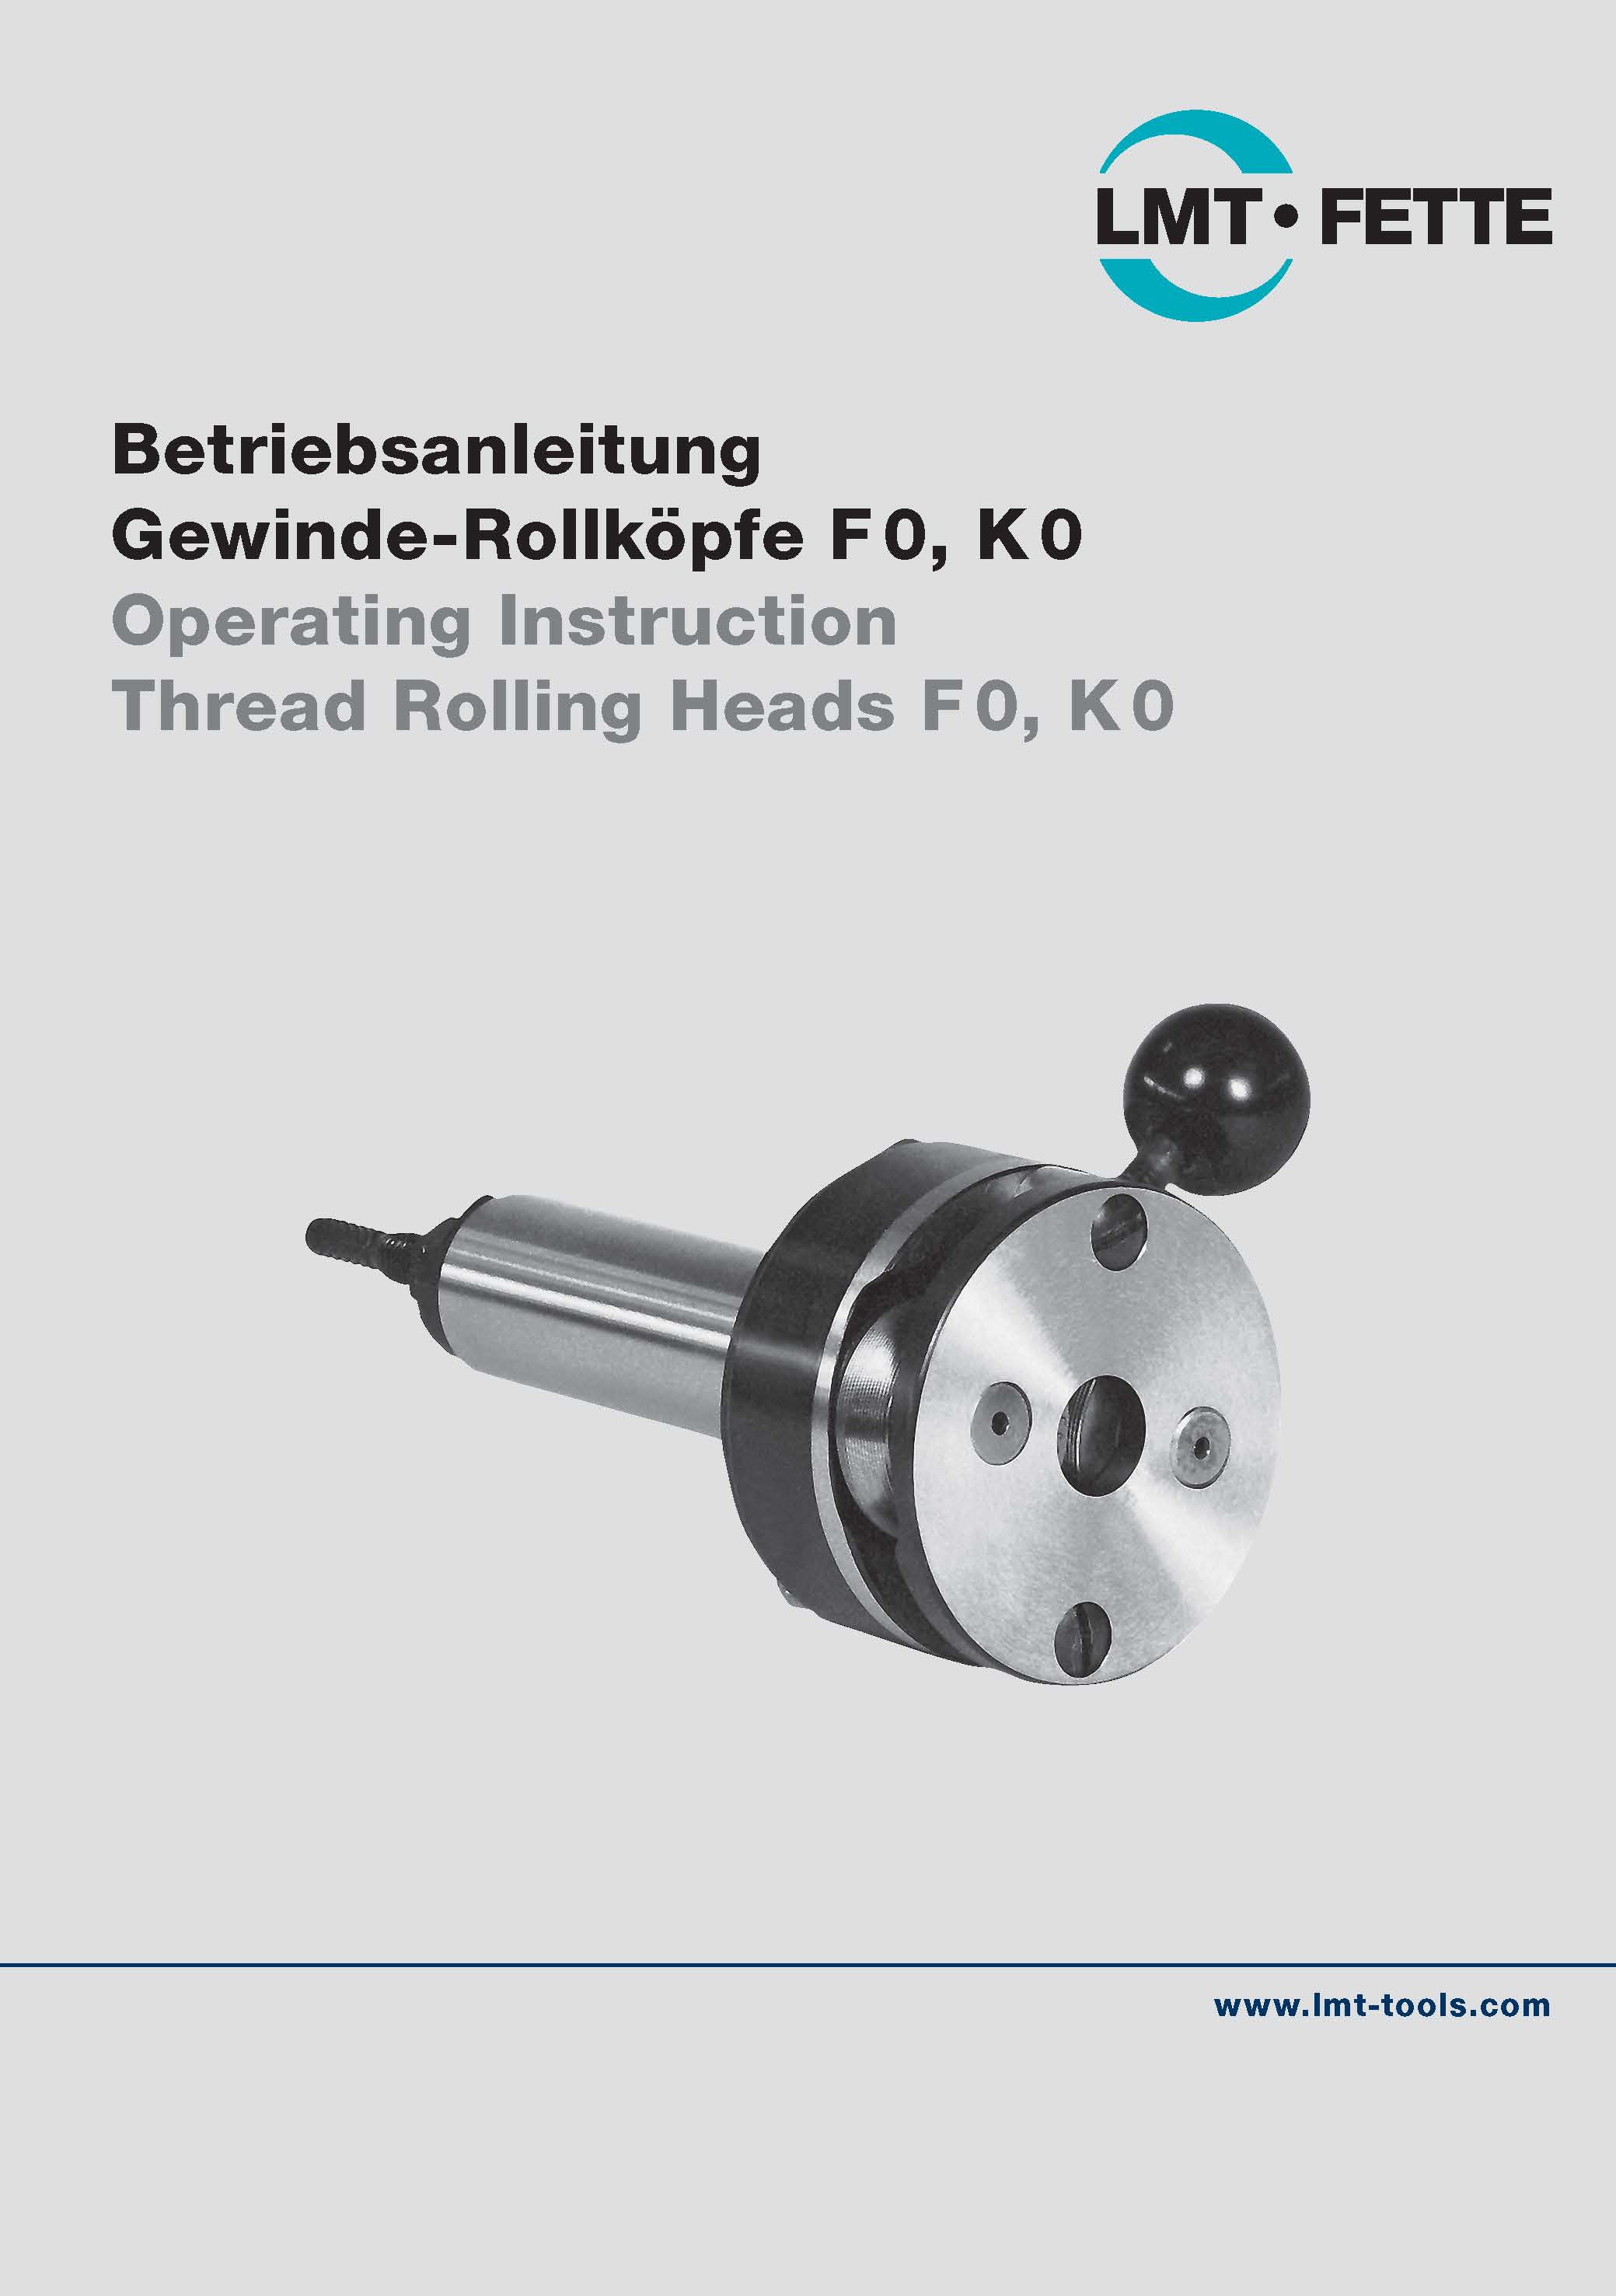 Operating Instruction Thread Rolling Heads F 0, K 0